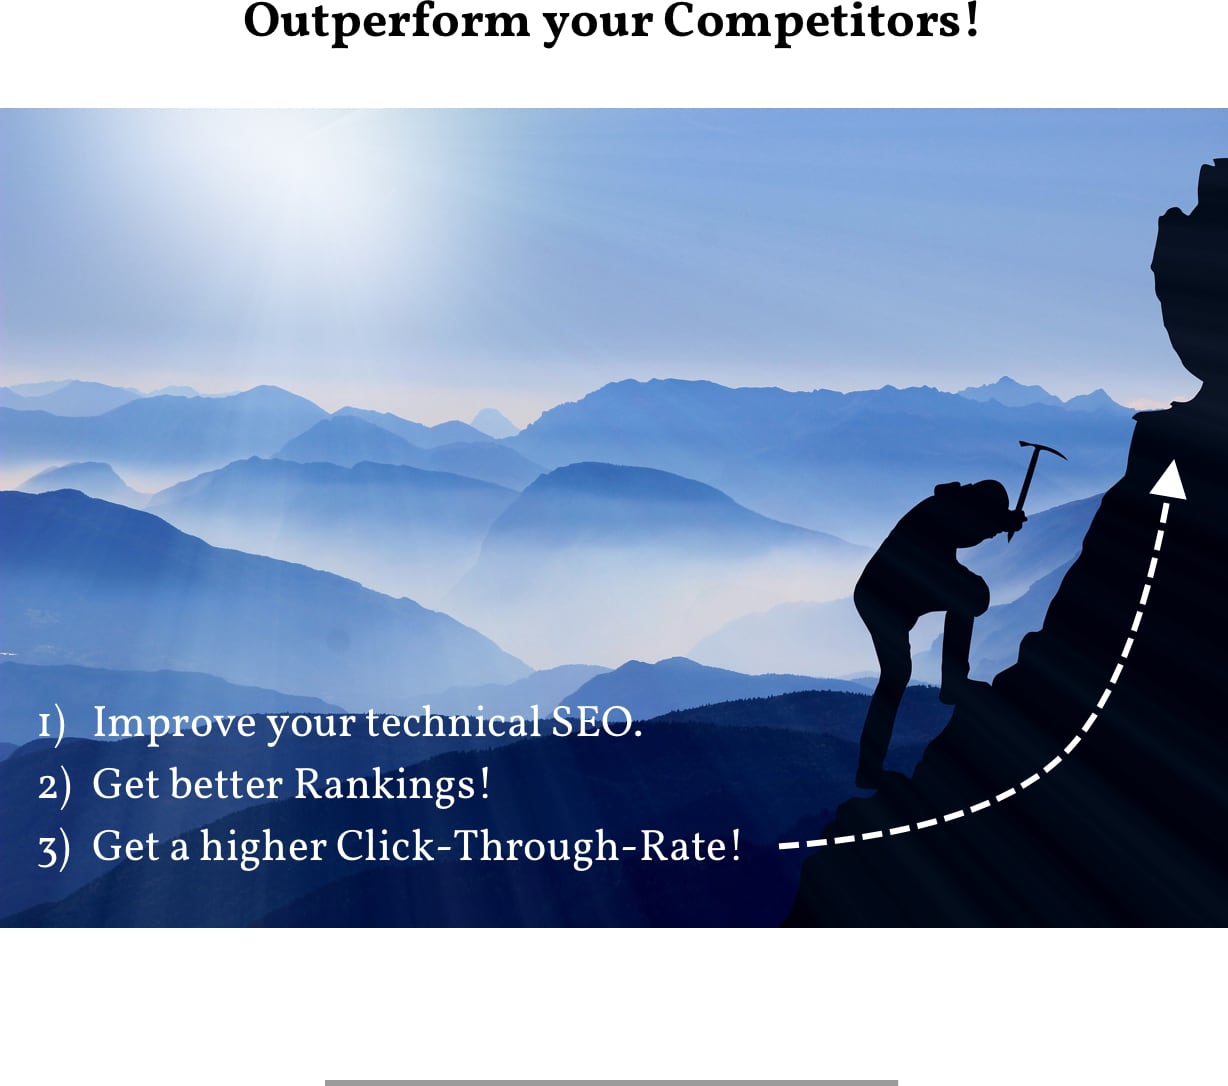 Outperform your competitors by improving your technical SEO, get better rankings and get a higher Click-Through-Rate.